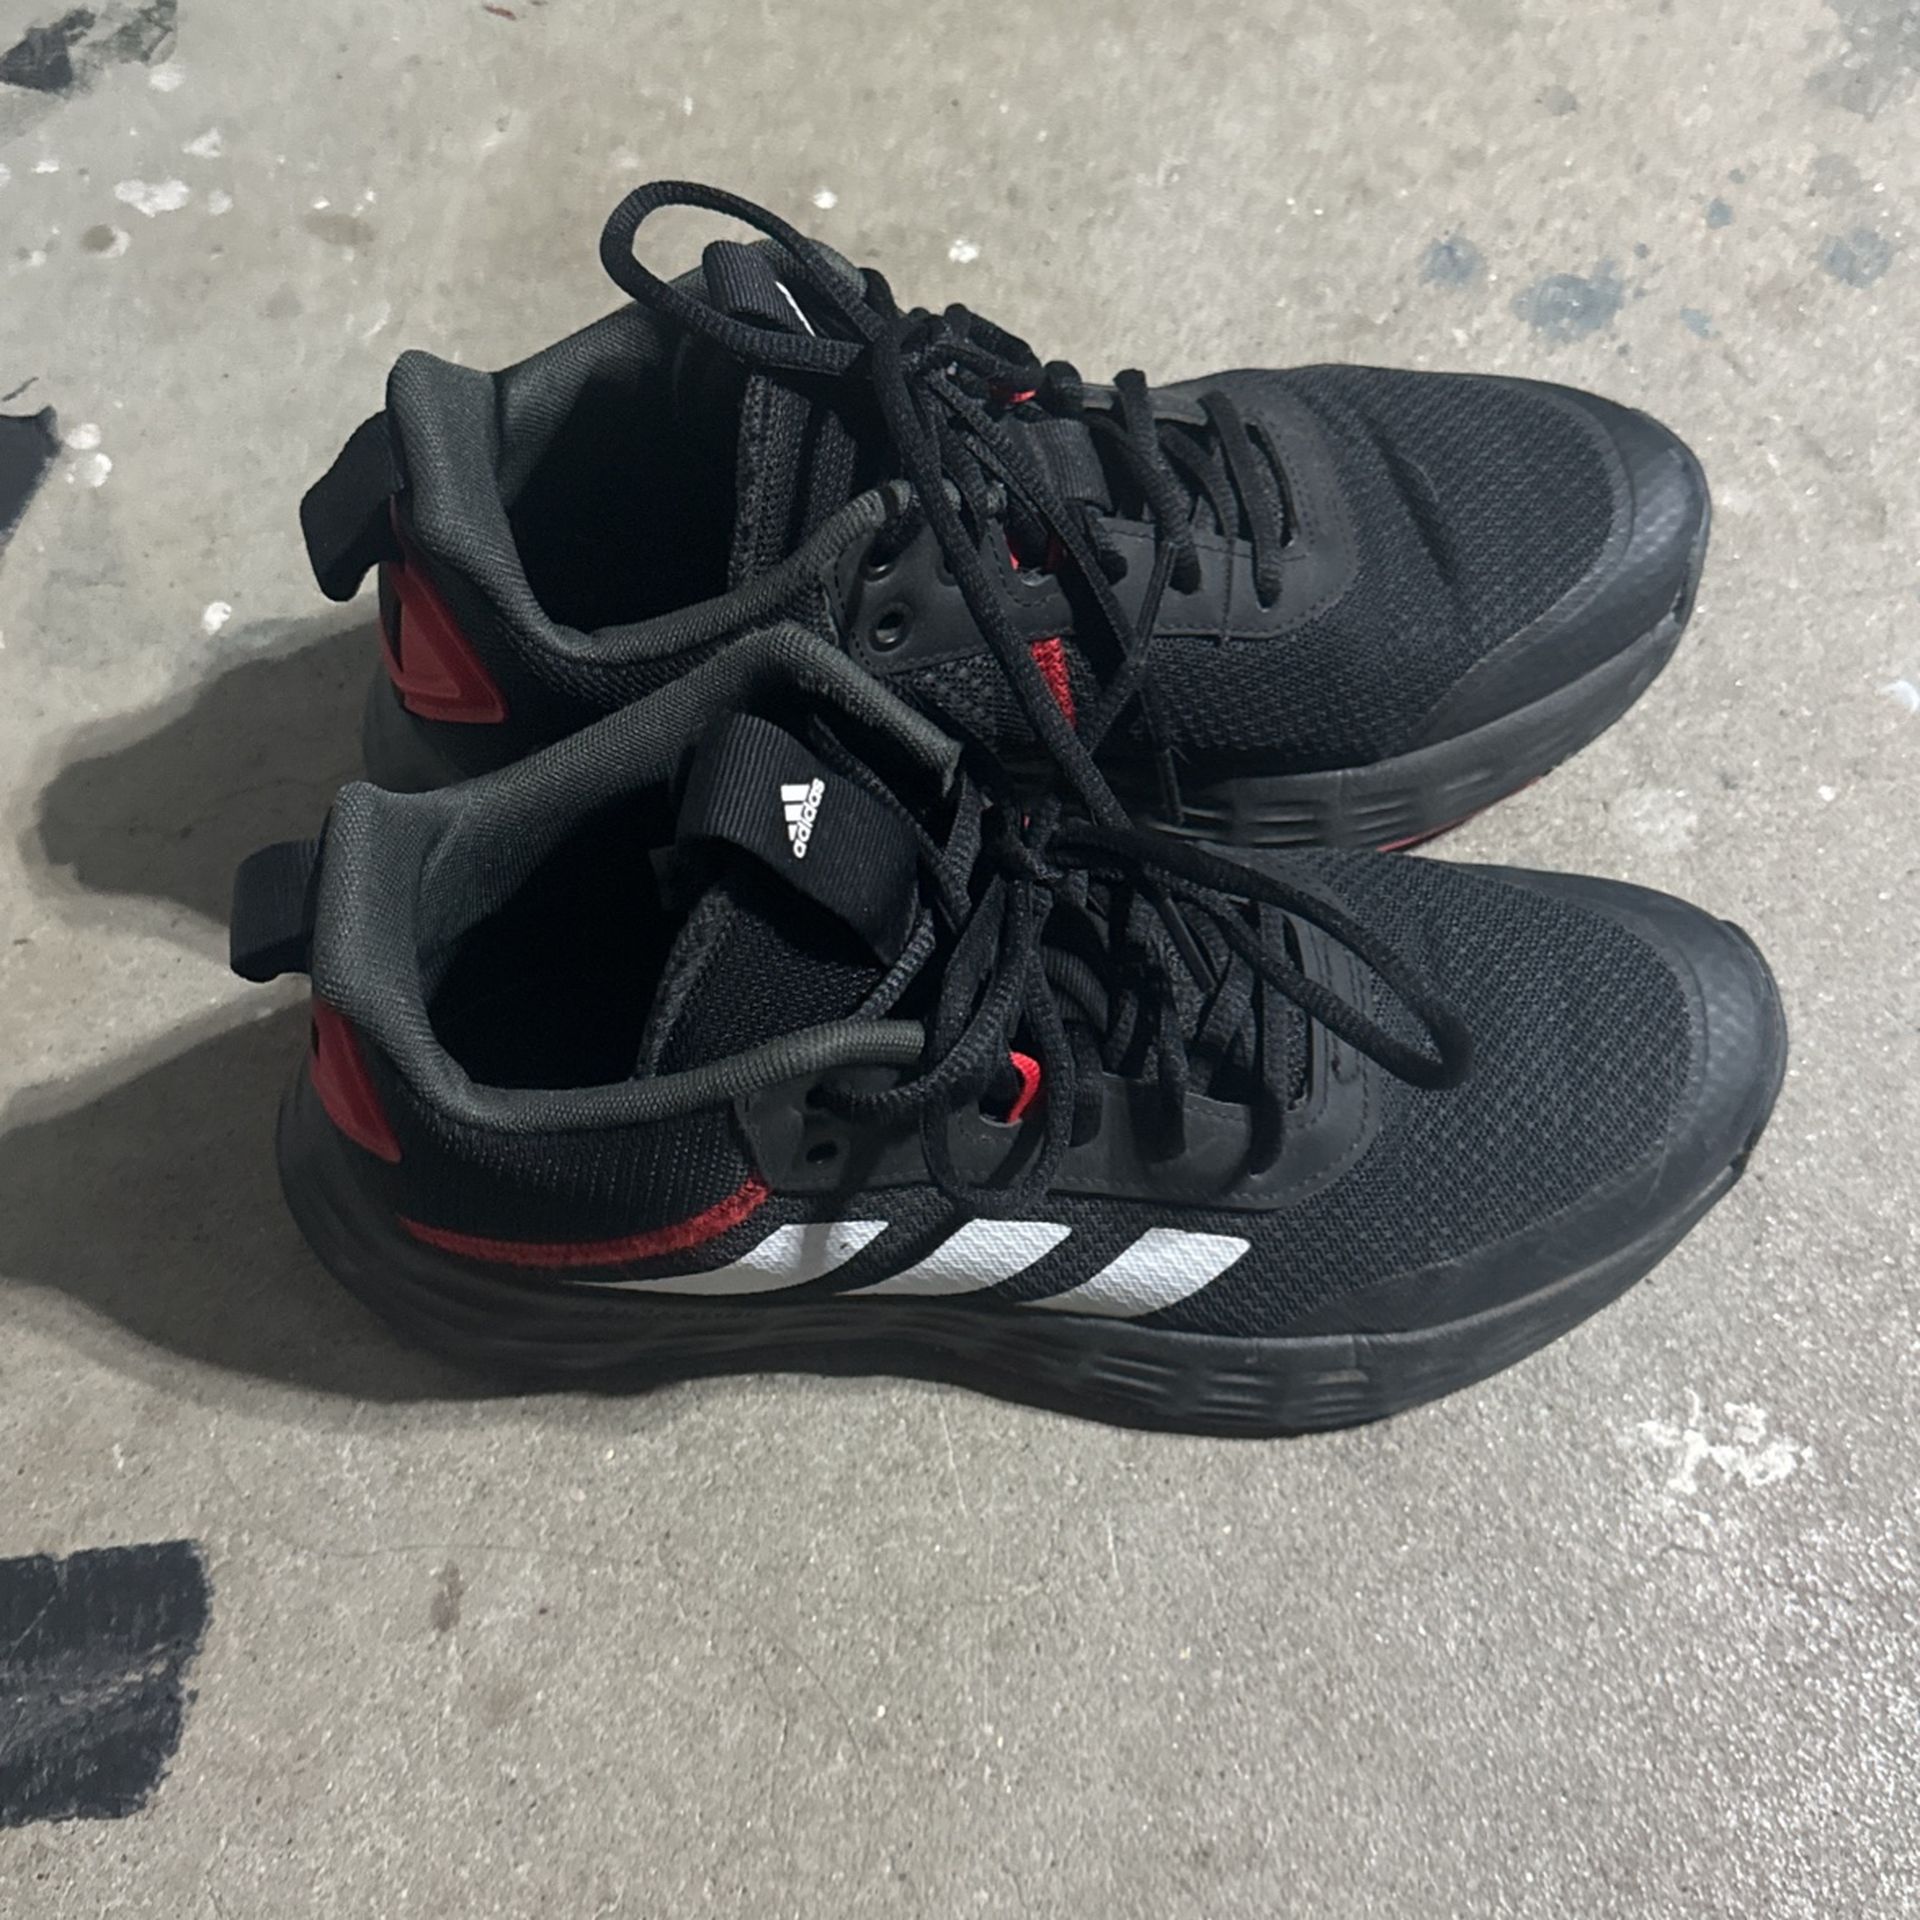 Free Boys Shoes Very Good Condition